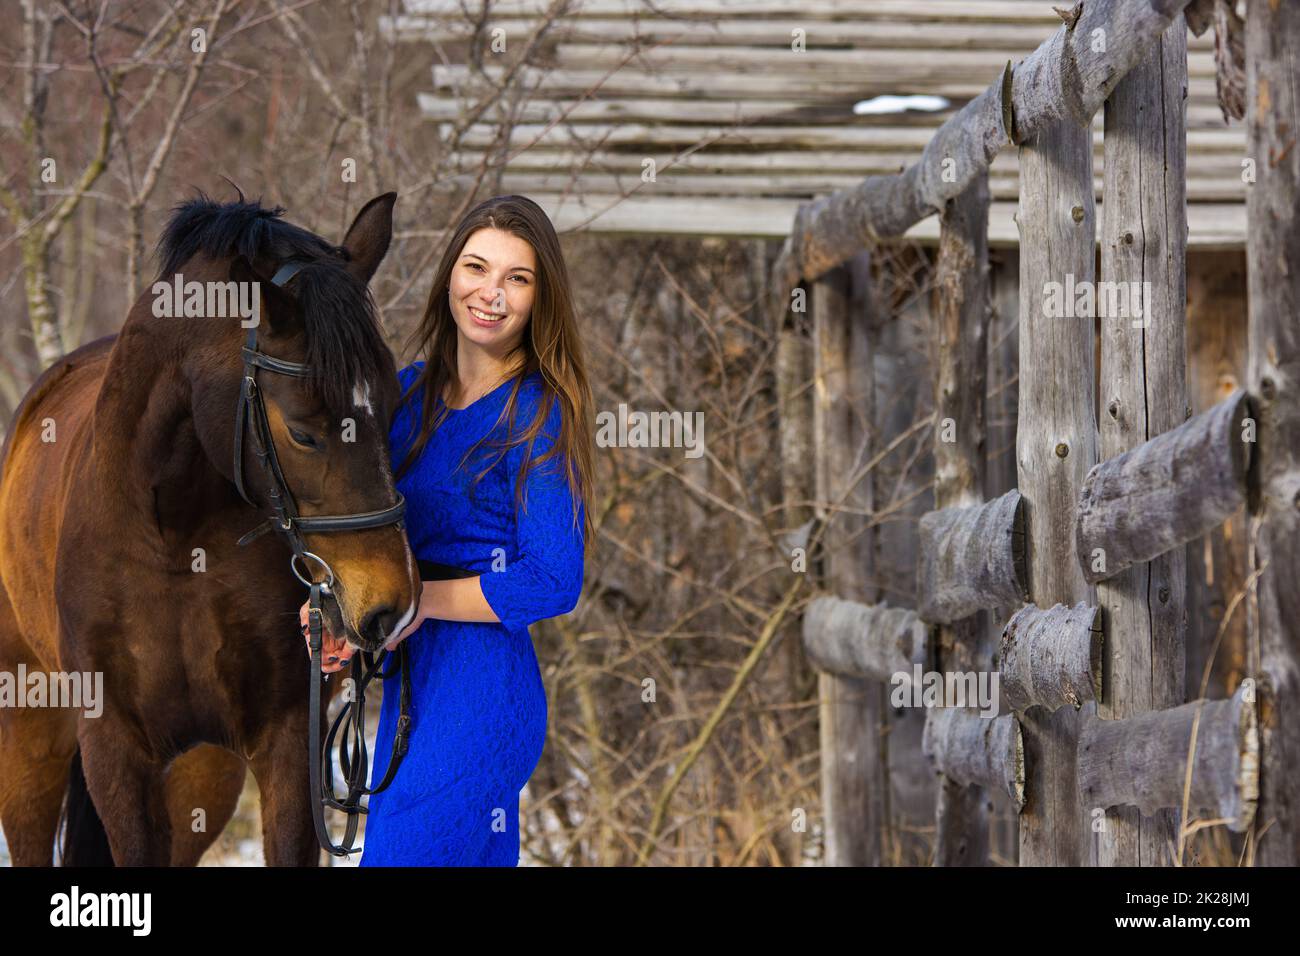 A beautiful young girl in a blue dress hugs a horse against the background of an old fence and a winter forest Stock Photo